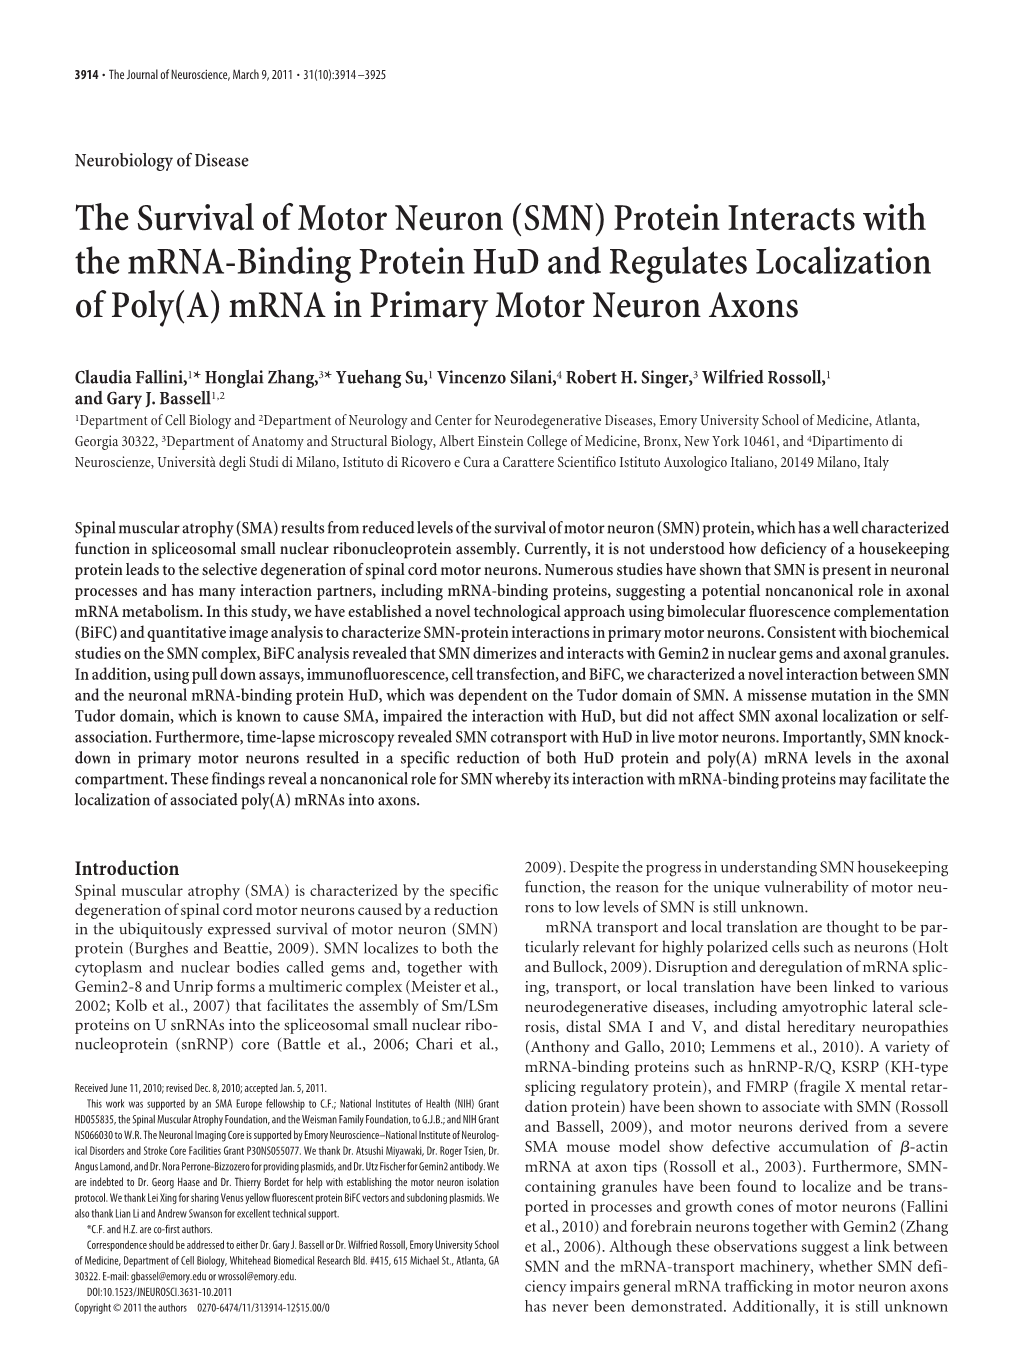 The Survival of Motor Neuron (SMN) Protein Interacts with the Mrna-Binding Protein Hud and Regulates Localization of Poly(A) Mrna in Primary Motor Neuron Axons